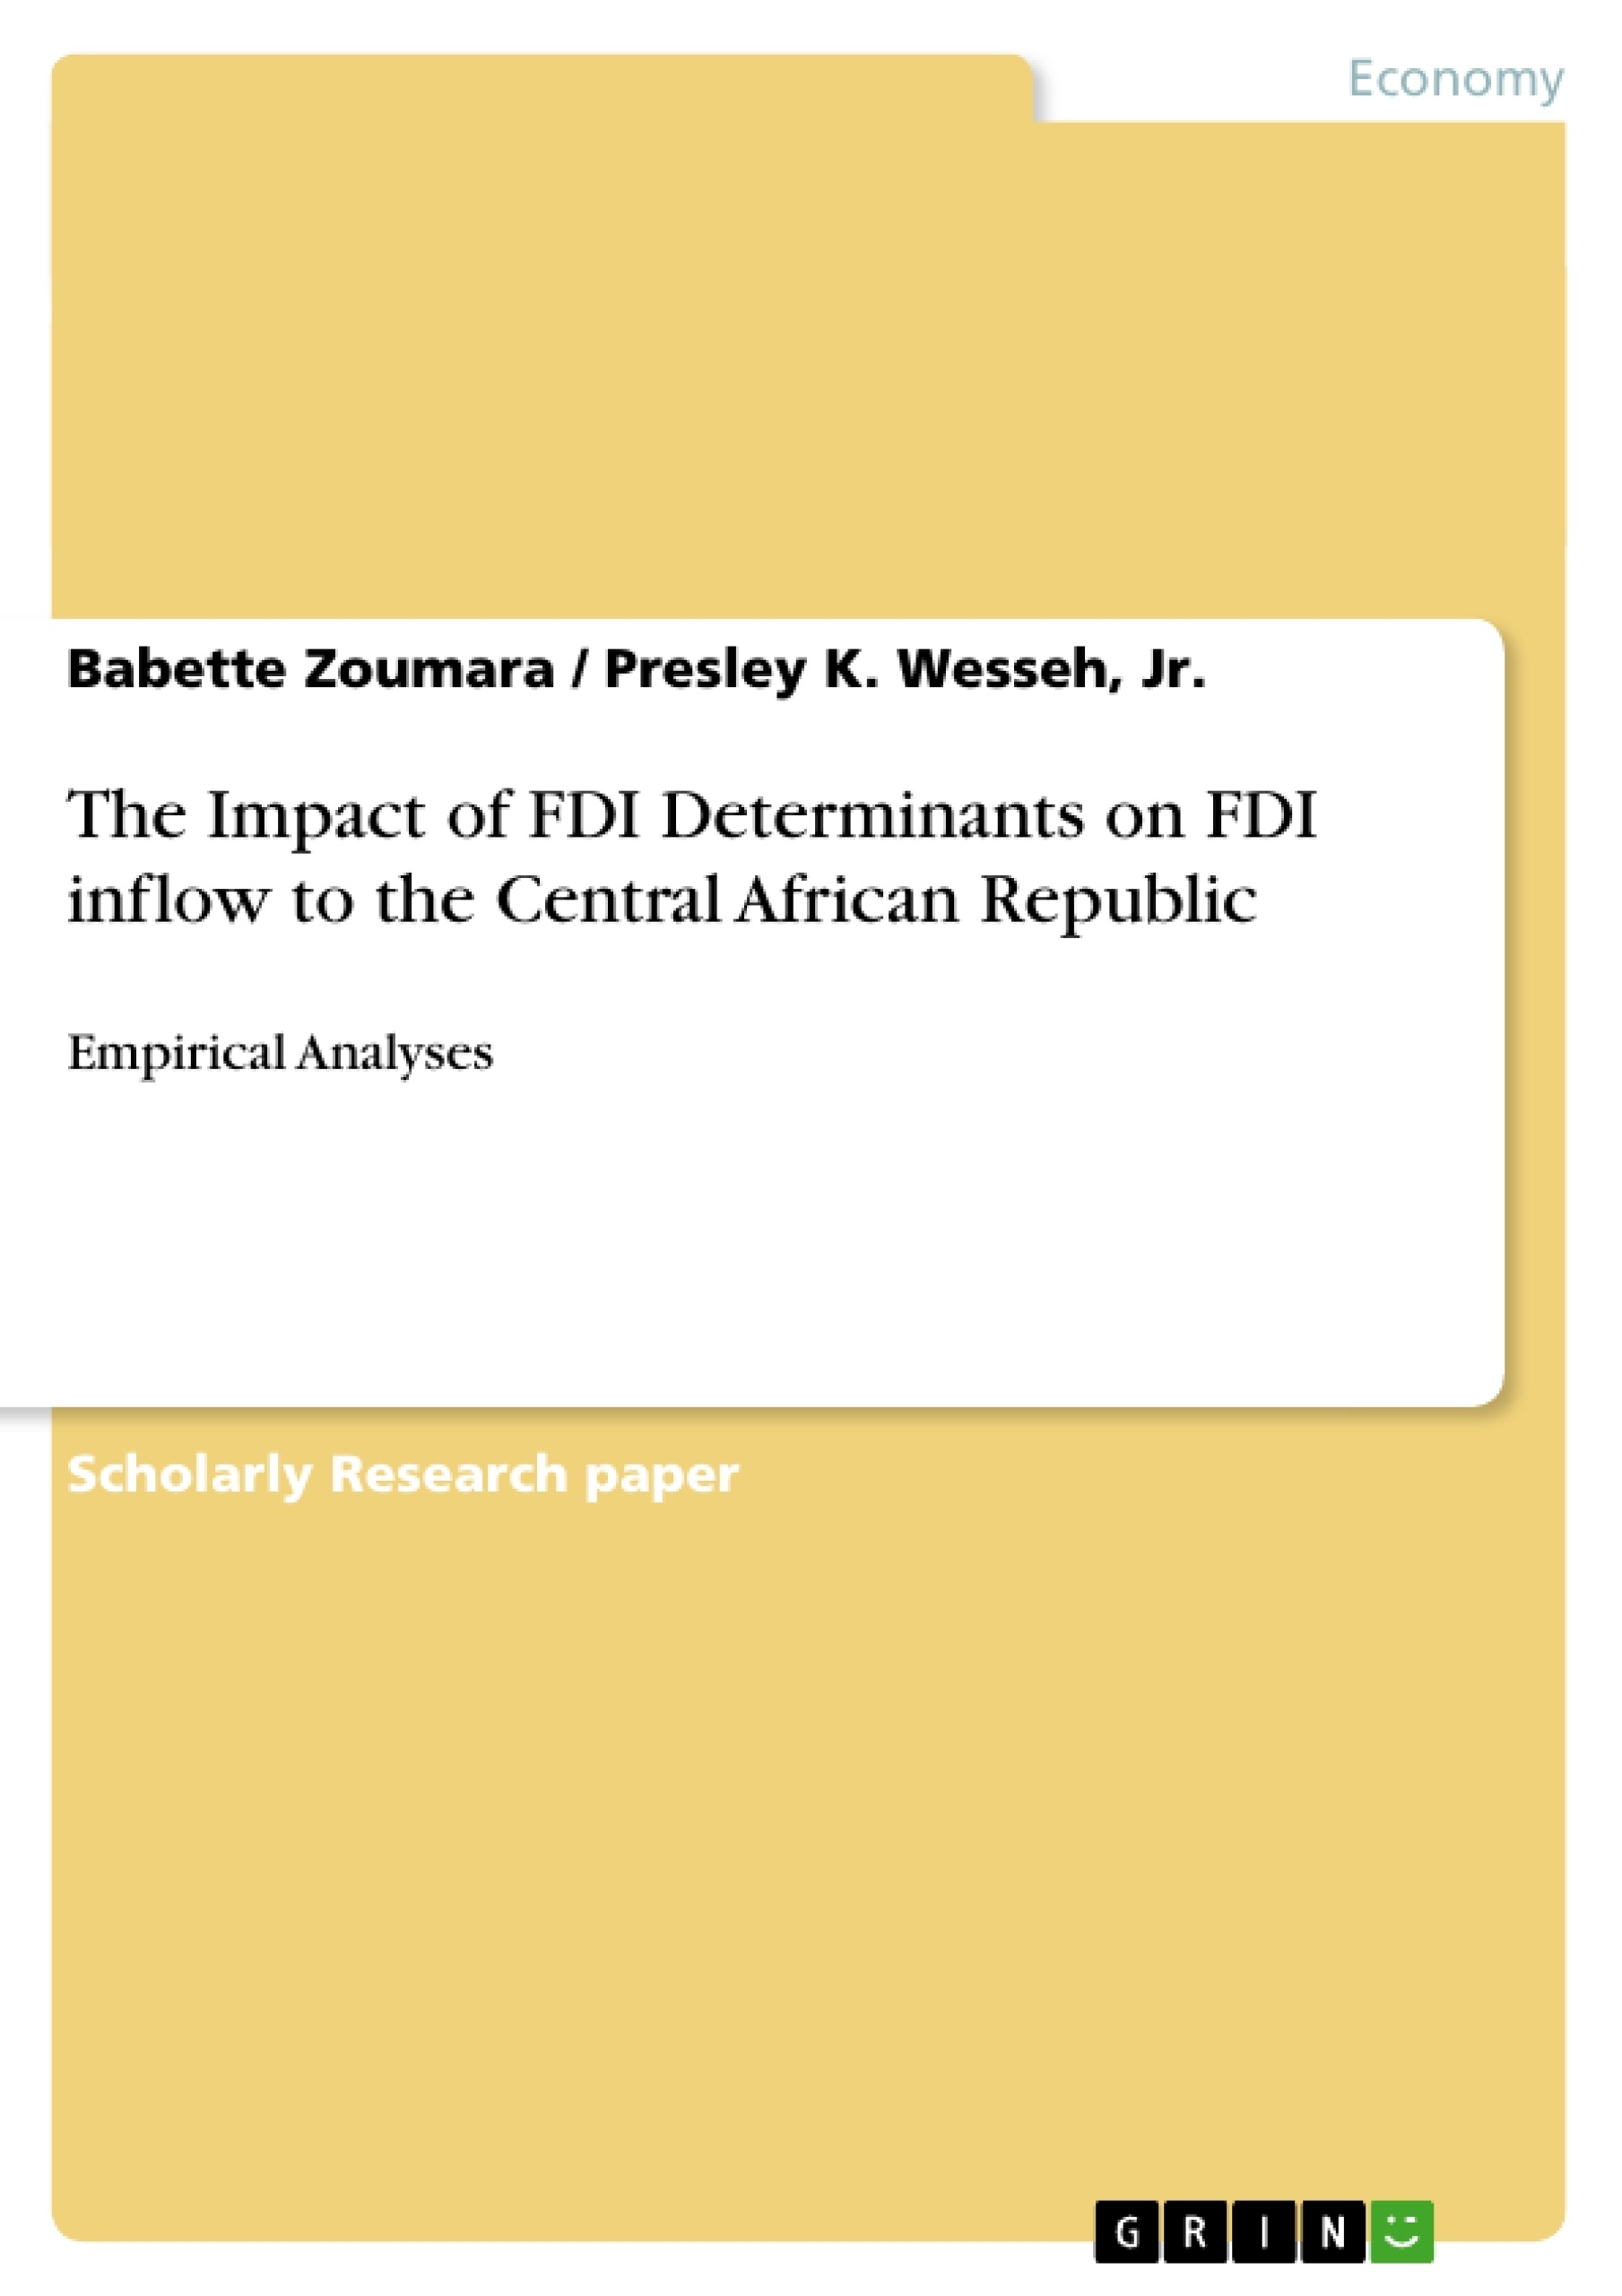 Titre: The Impact of FDI Determinants on FDI inflow to the Central African Republic